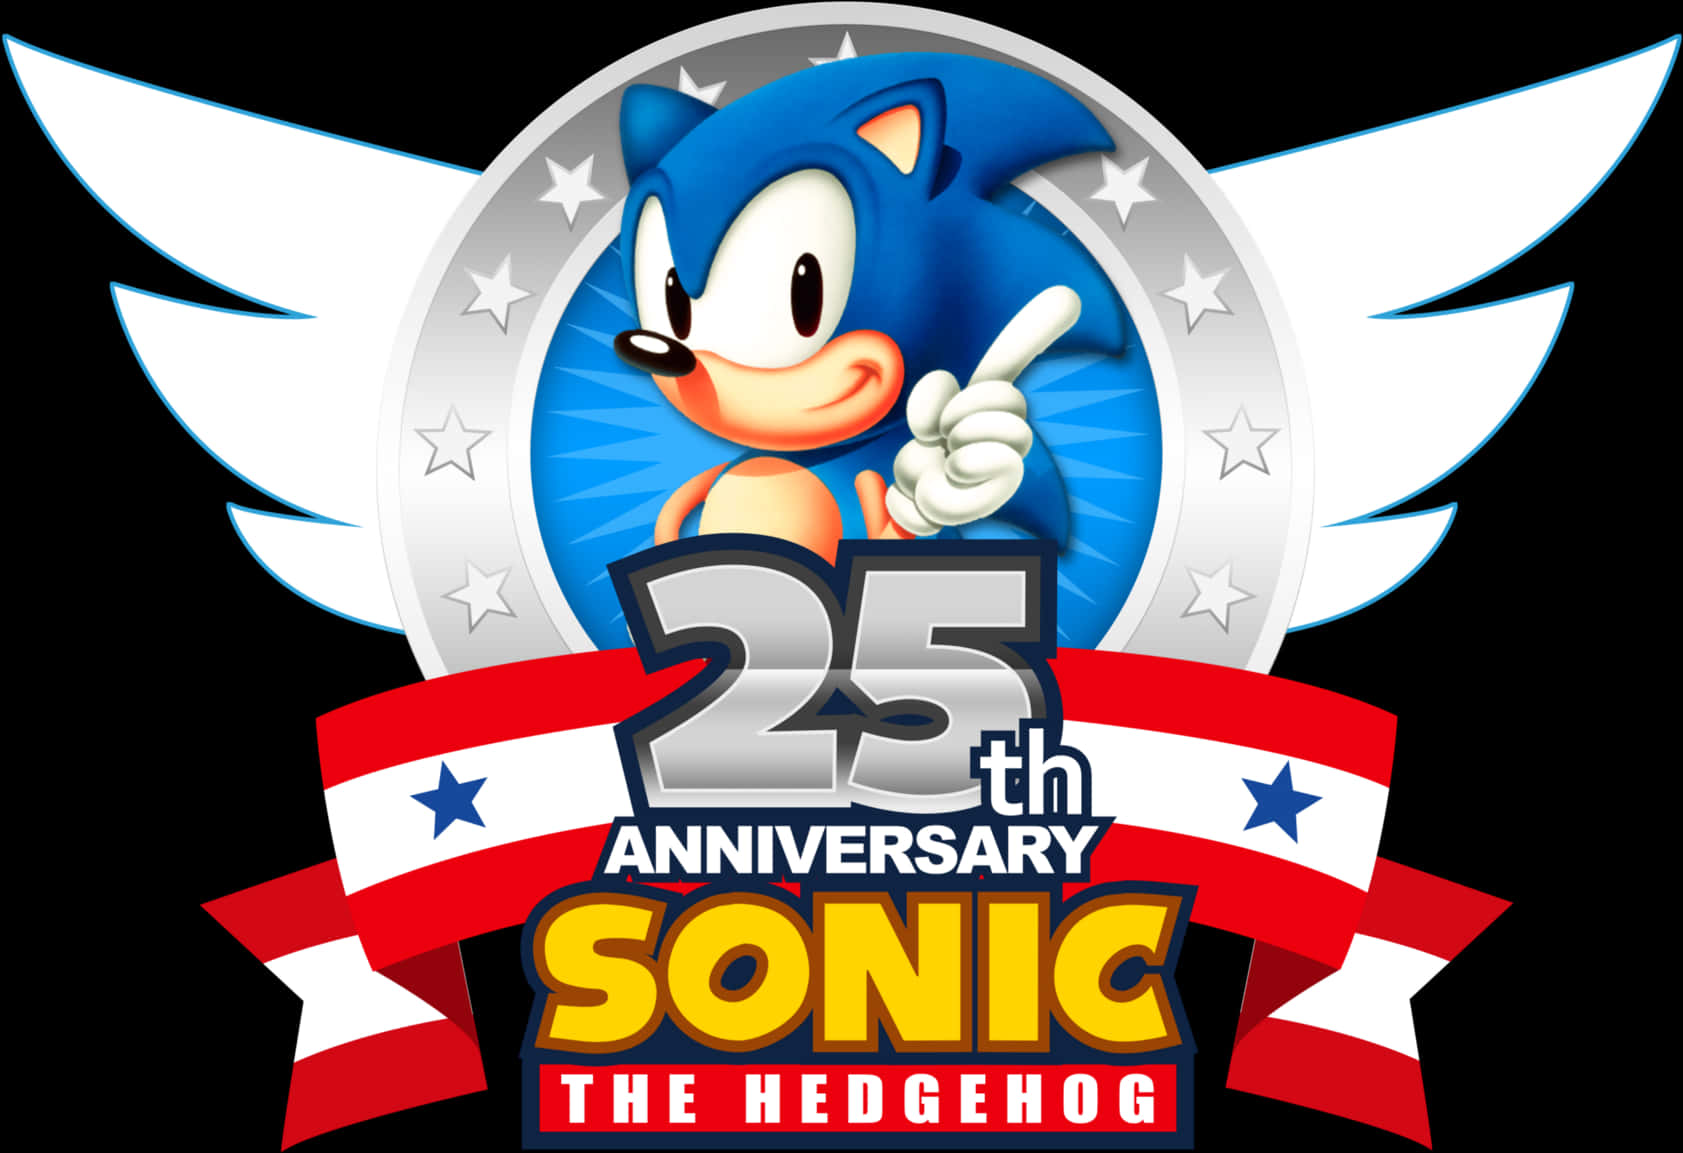 Sonic25th Anniversary Logo PNG image